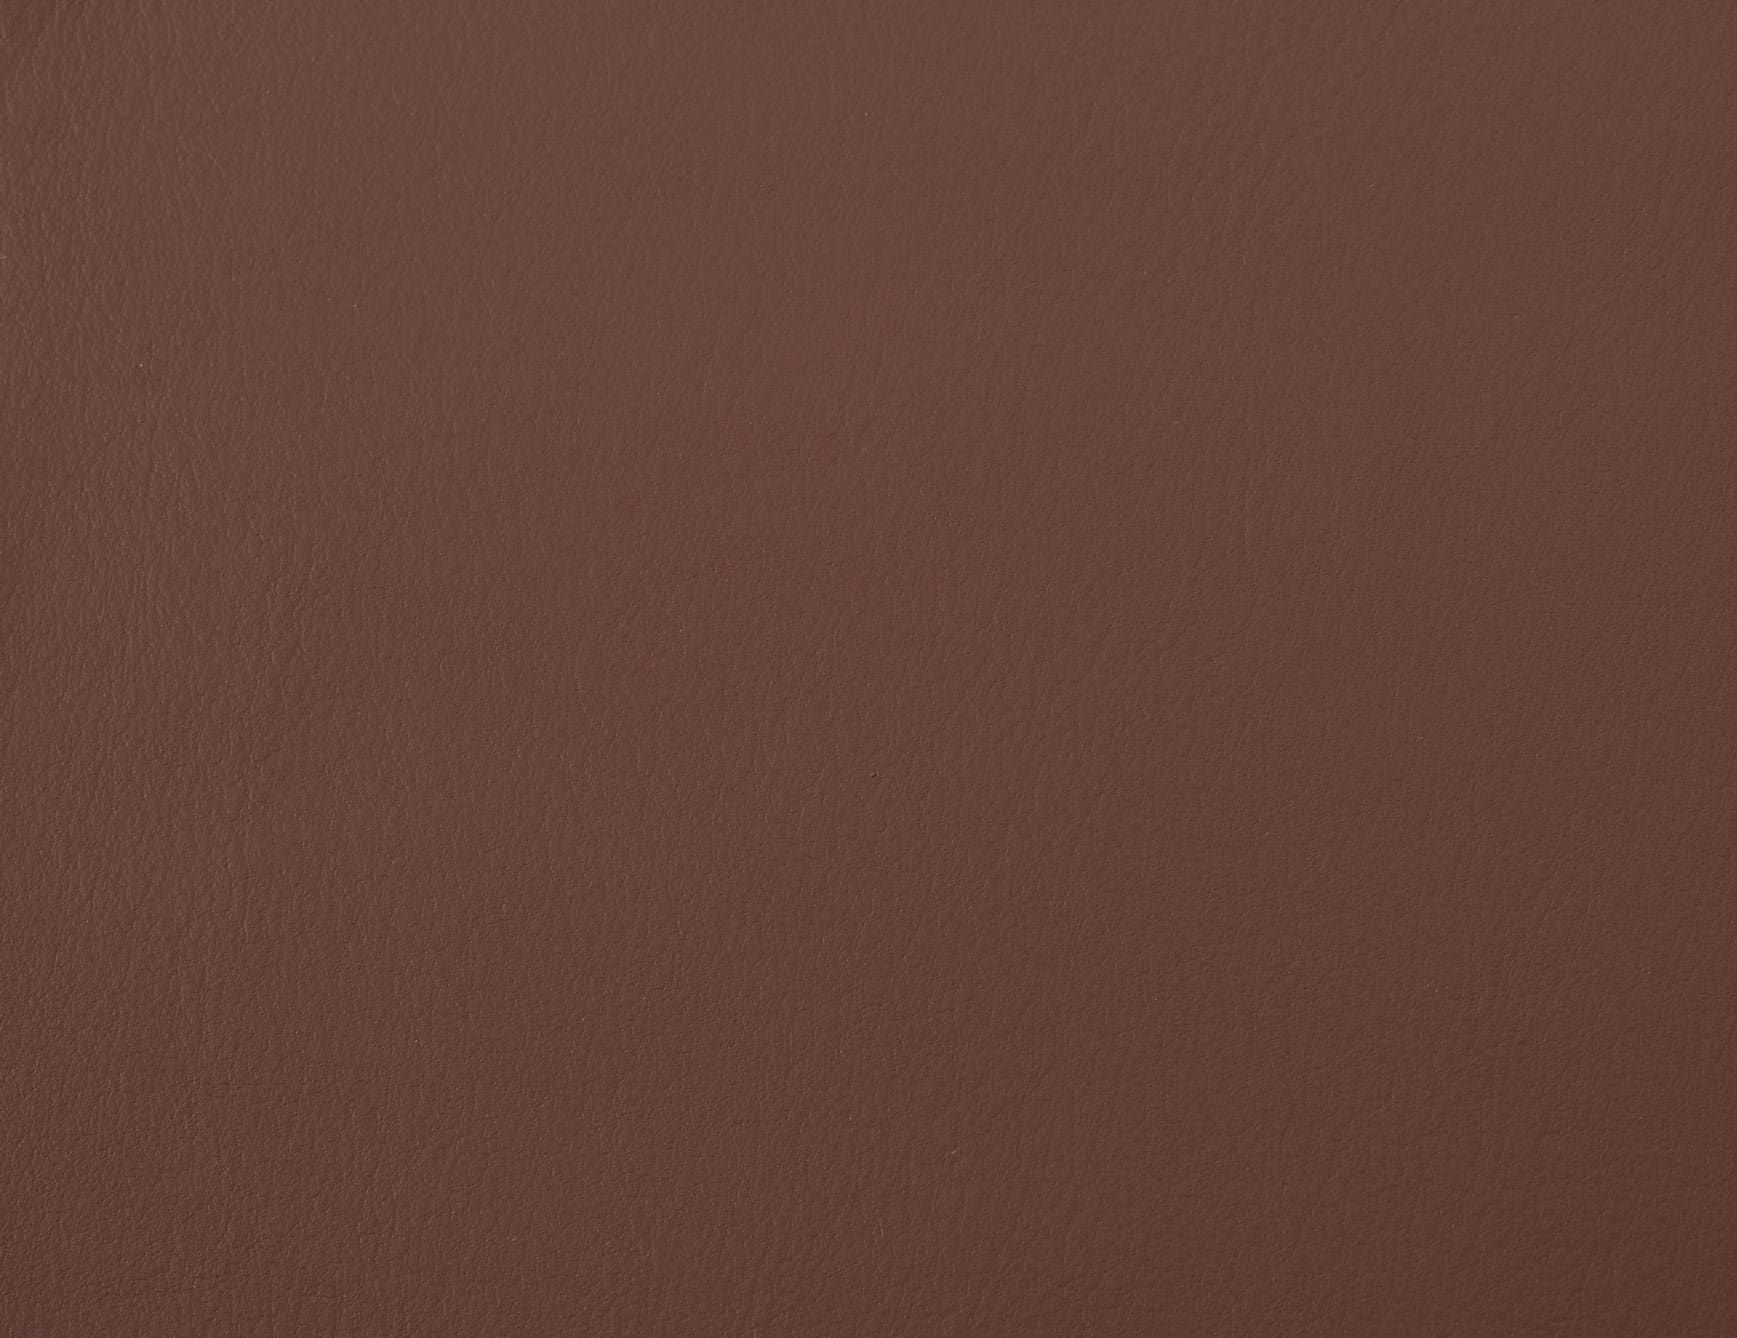 Castagna contemporary Italian upholstery leather in brown